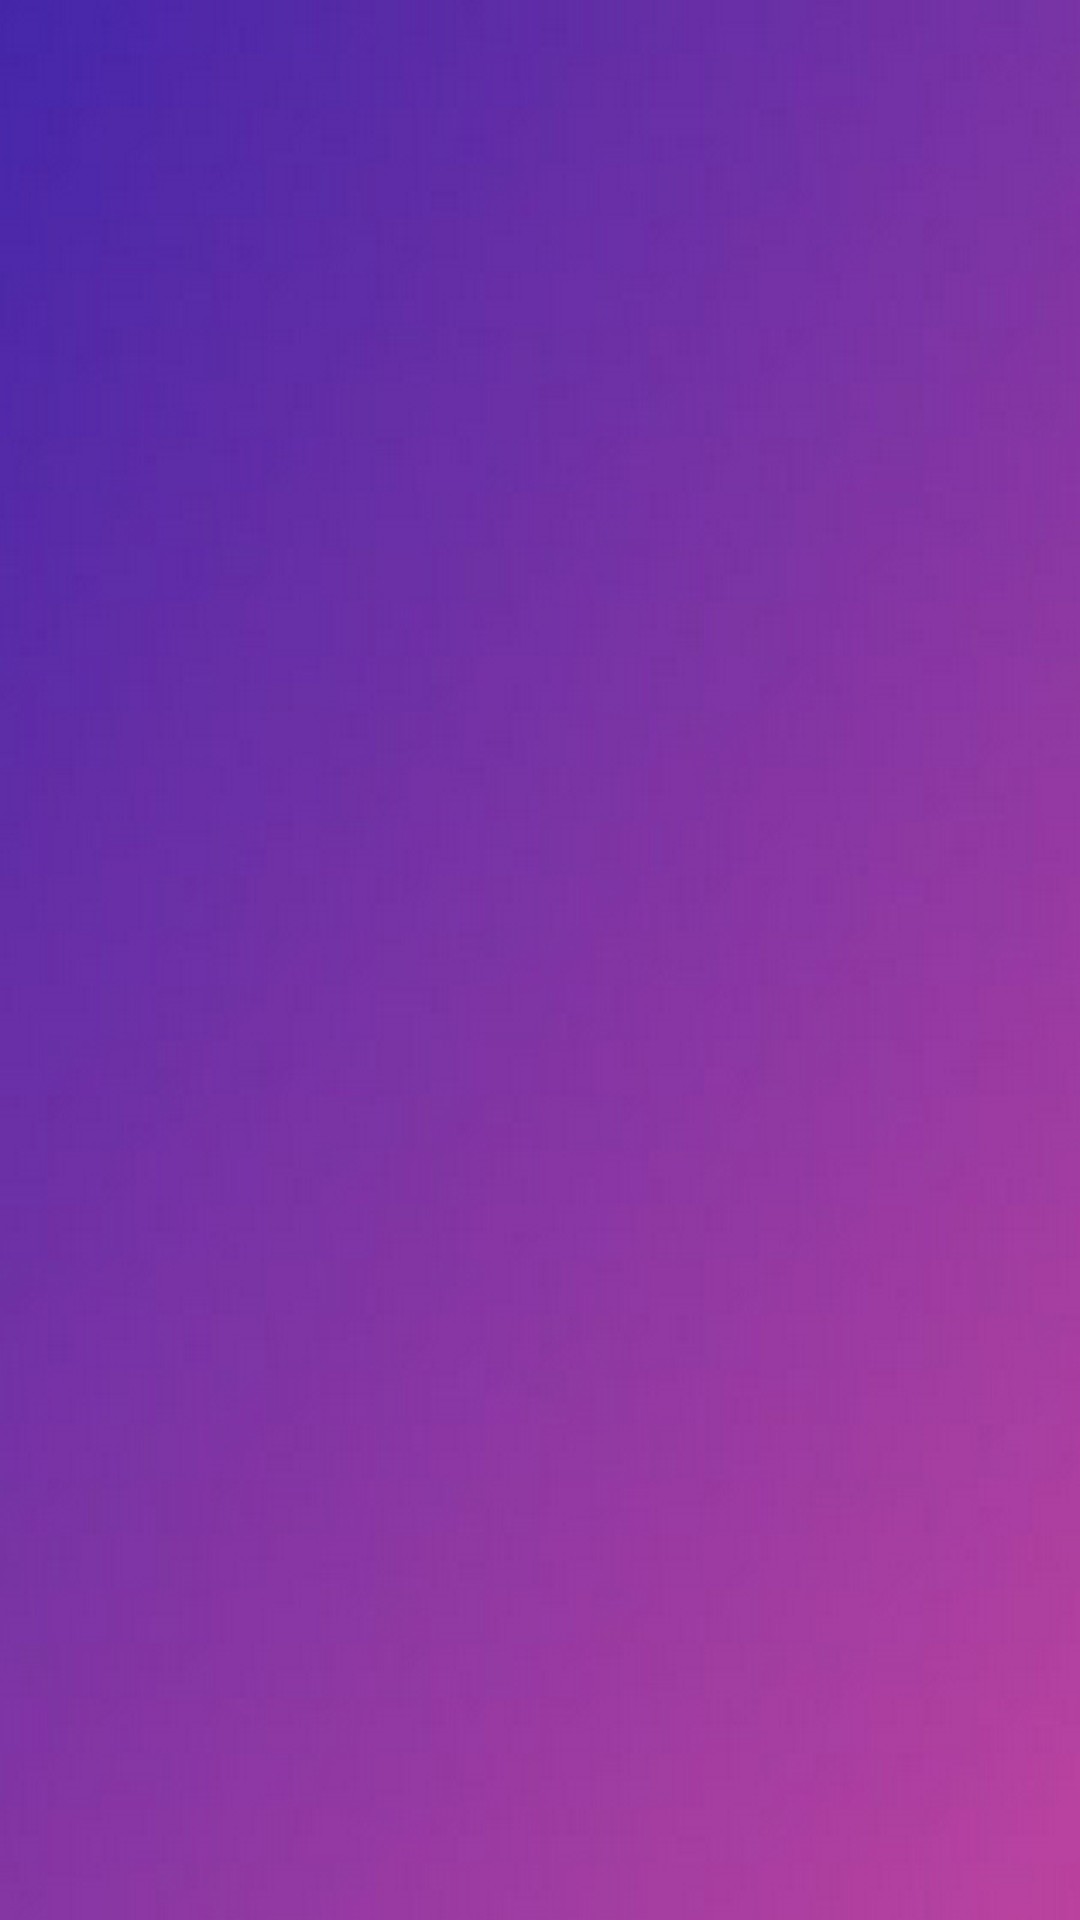 Android Wallpaper Neon Purple with high-resolution 1080x1920 pixel. You can use this wallpaper for your Android backgrounds, Tablet, Samsung Screensavers, Mobile Phone Lock Screen and another Smartphones device